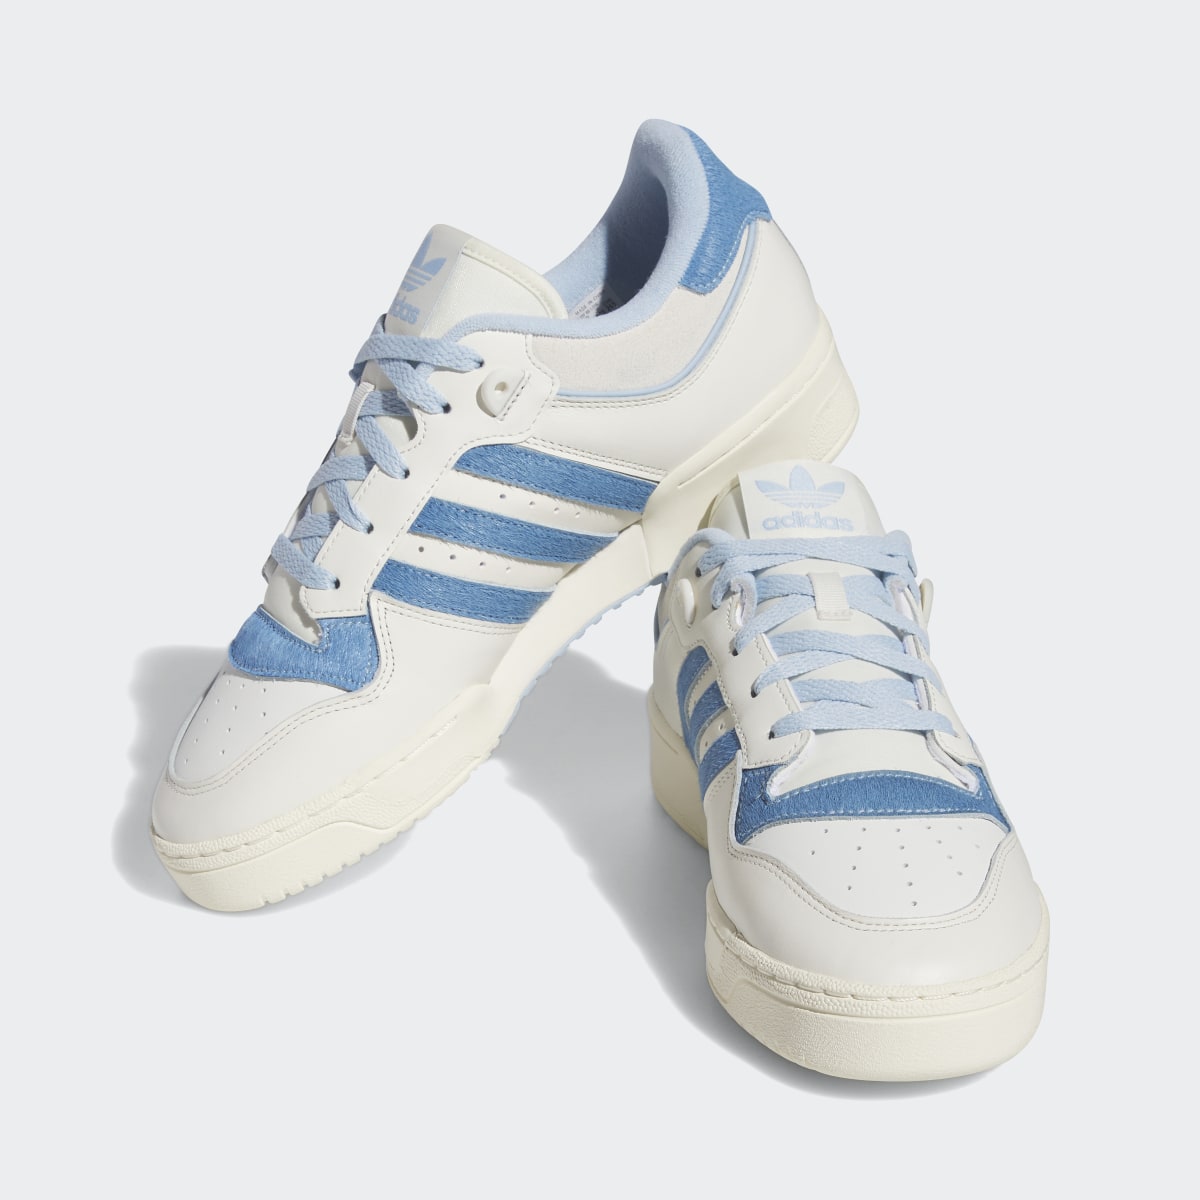 Adidas Rivalry Low 86 Schuh. 5